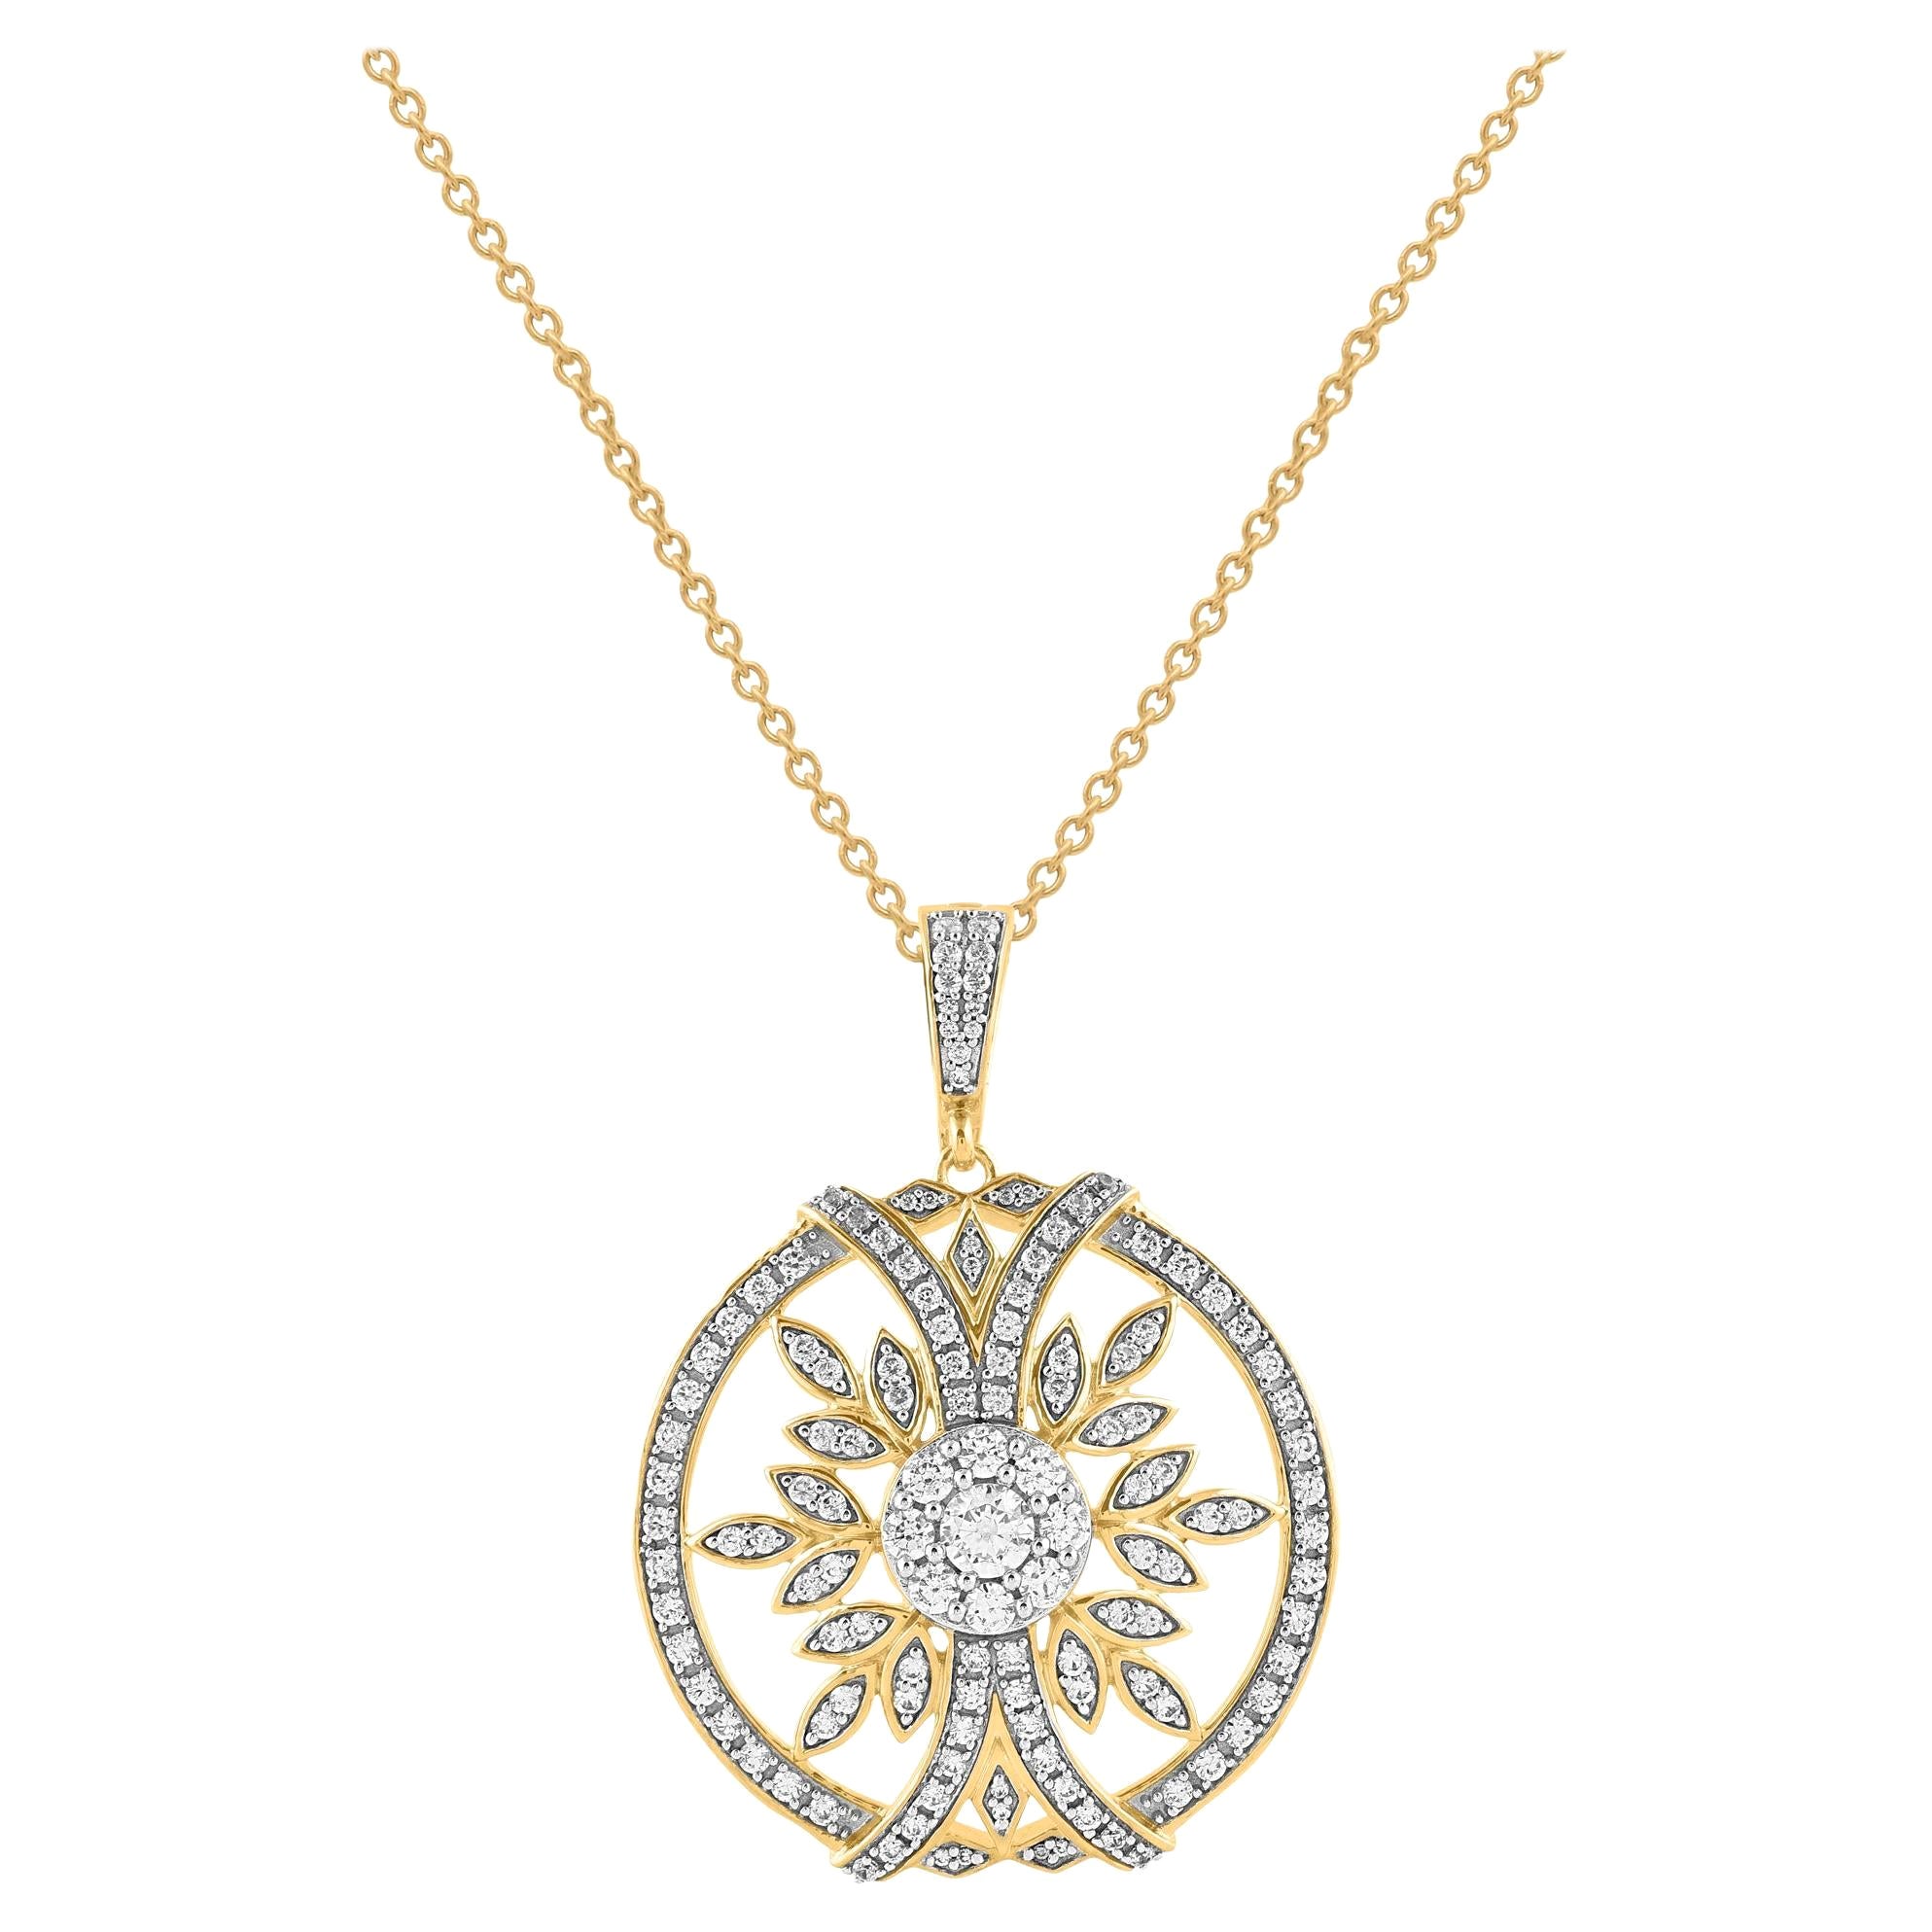 TJD 1.0 Carat Natural Round Diamond 18KT Yellow Gold Circle Cluster Necklace For Sale